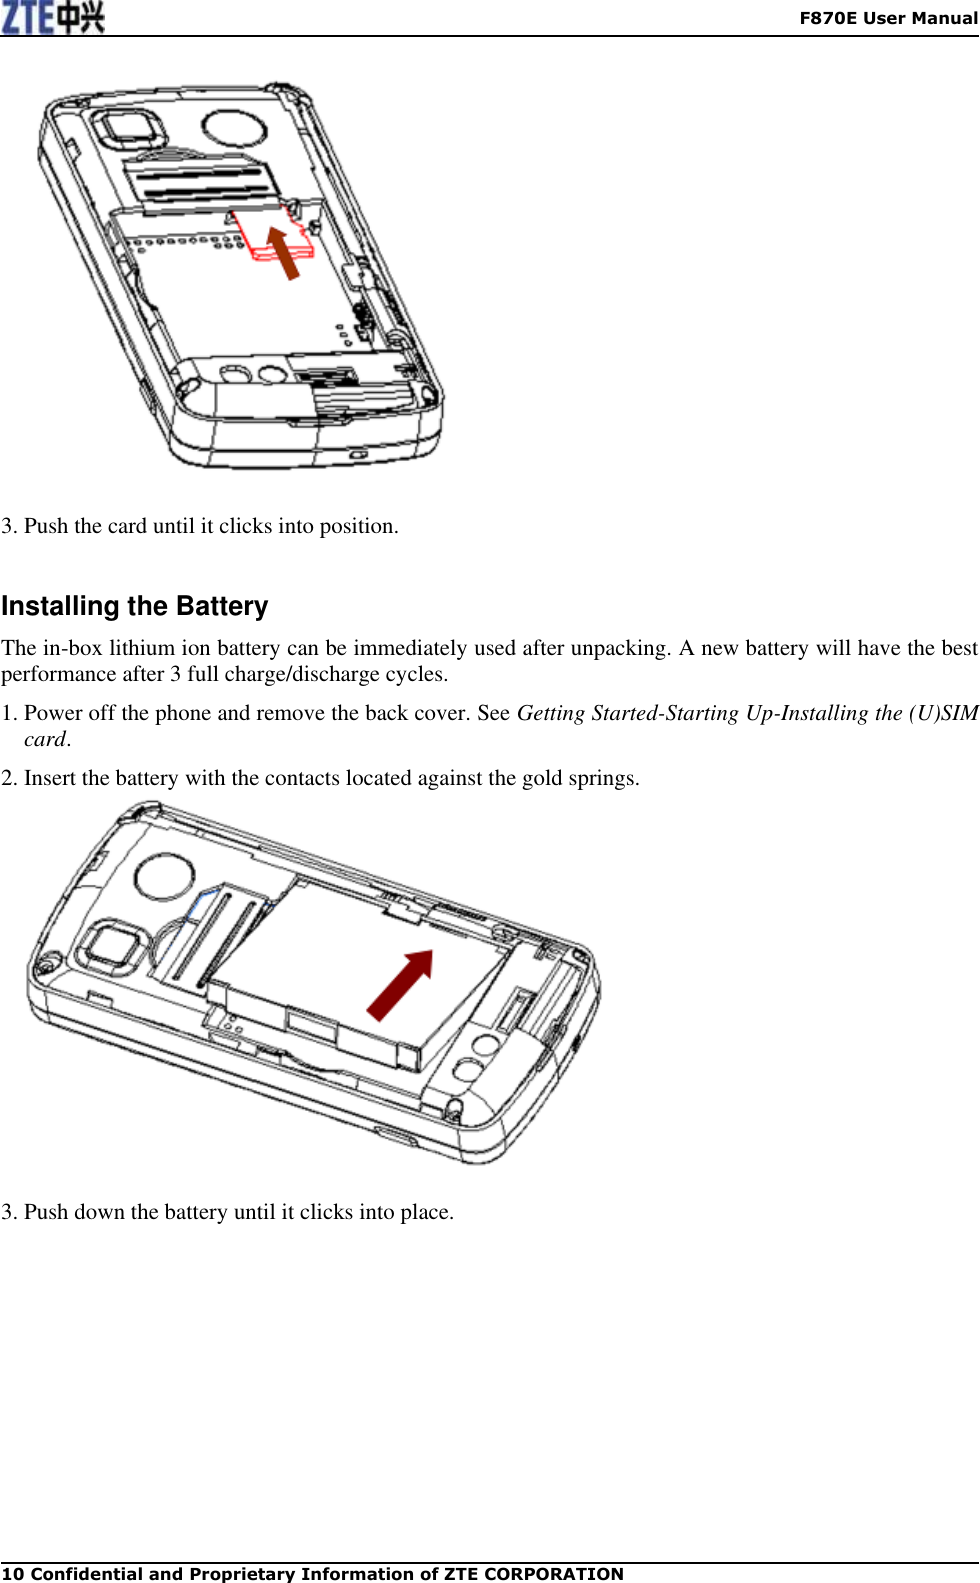    F870E User Manual 10 Confidential and Proprietary Information of ZTE CORPORATION   3. Push the card until it clicks into position.  Installing the Battery The in-box lithium ion battery can be immediately used after unpacking. A new battery will have the best performance after 3 full charge/discharge cycles. 1. Power off the phone and remove the back cover. See Getting Started-Starting Up-Installing the (U)SIM card. 2. Insert the battery with the contacts located against the gold springs.   3. Push down the battery until it clicks into place. 